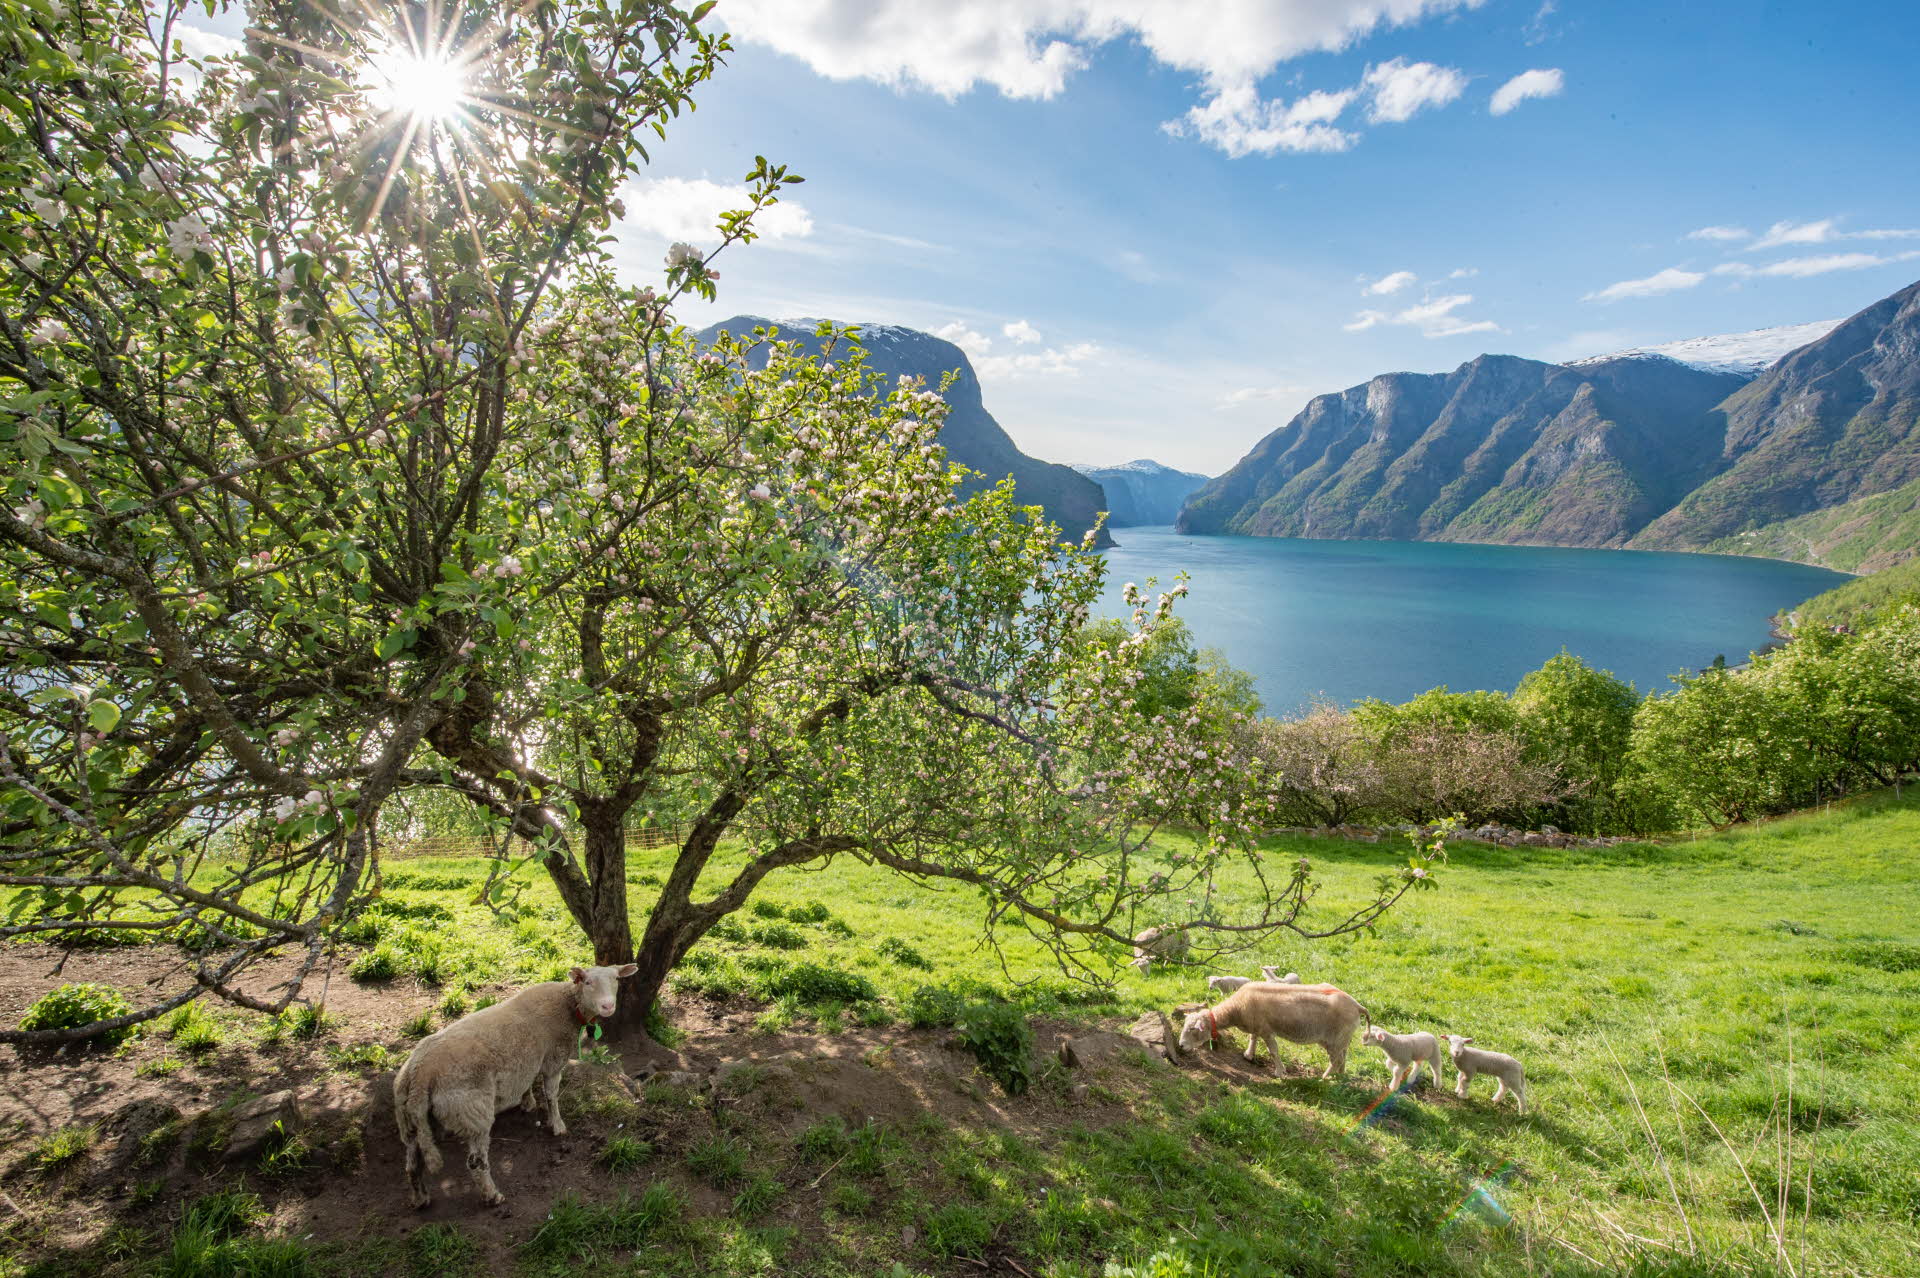 The Aurlandsfjord with apple trees and sheep at the front